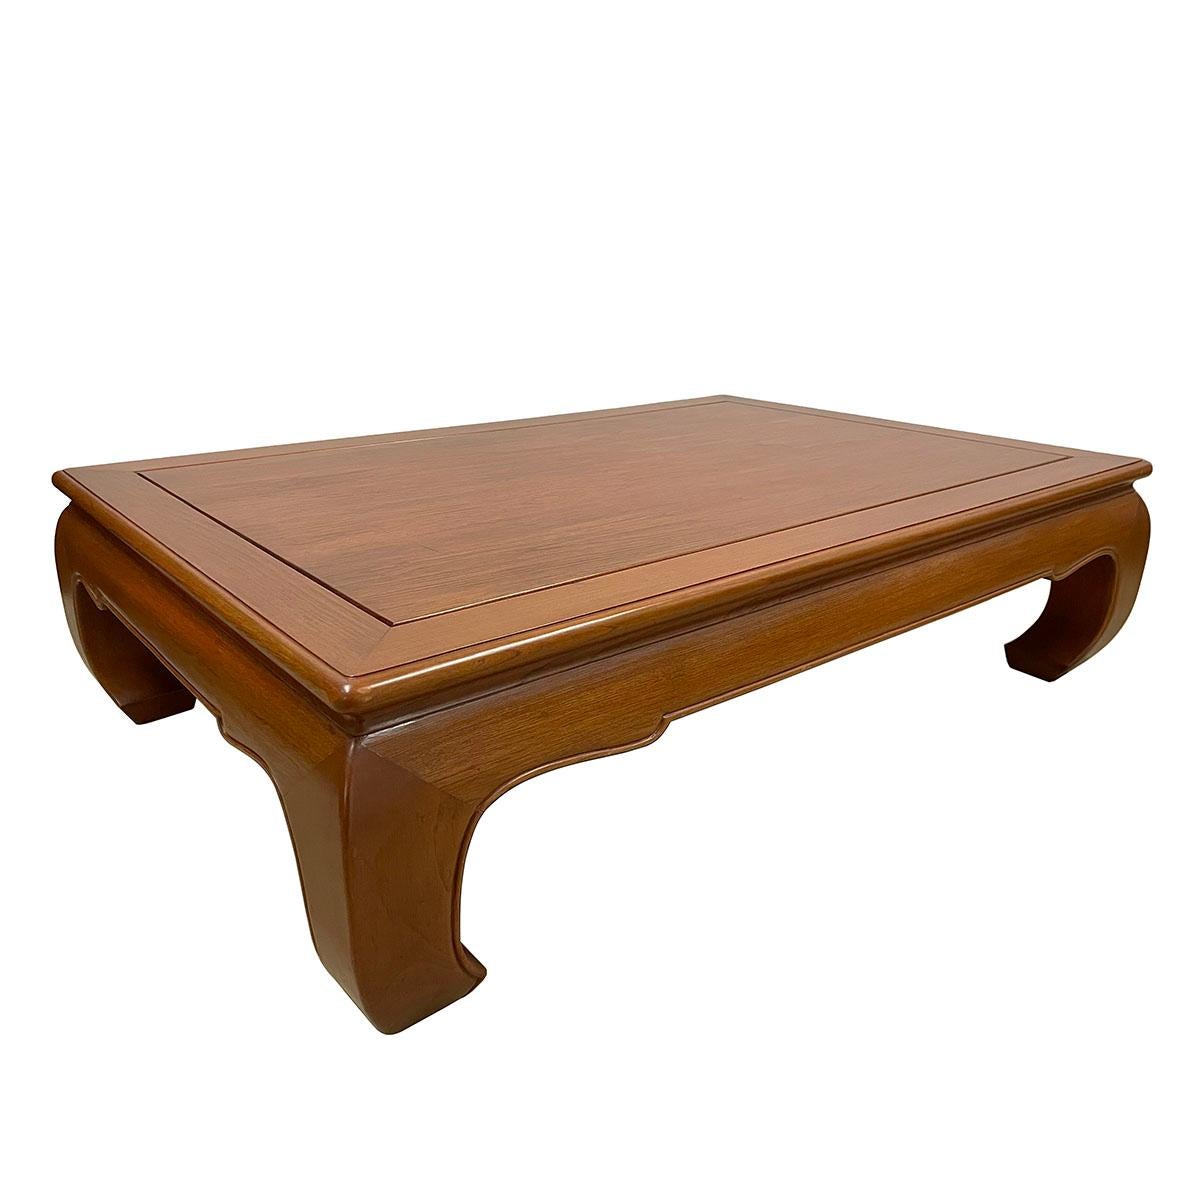 This Huge classic solid rosewood coffee table is laced with hand-carved cloud motif along the four sides of the apron.The curved big banana shape feet give a graceful and also sturdy look. Constructed with traditional joinery technique provides